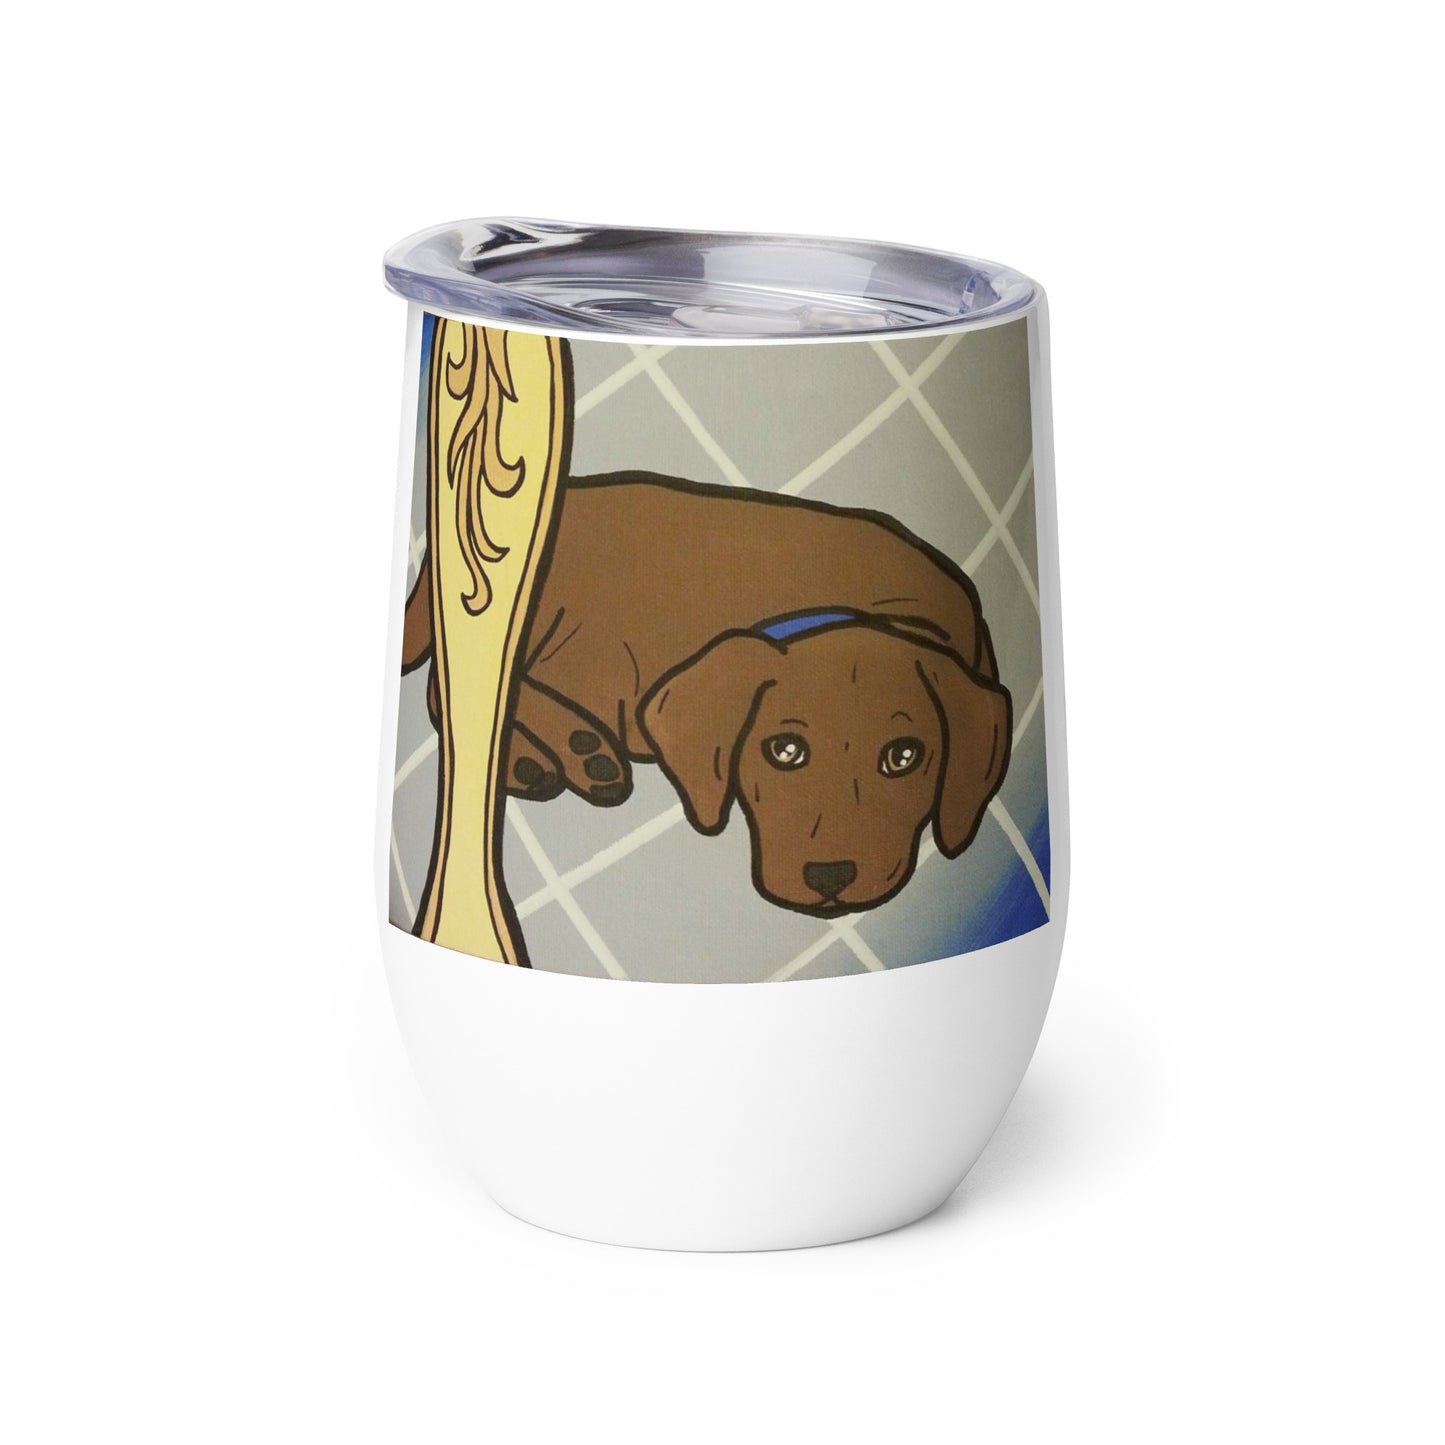 Wine tumbler - Stanford and Samantha Love at 1st Sight